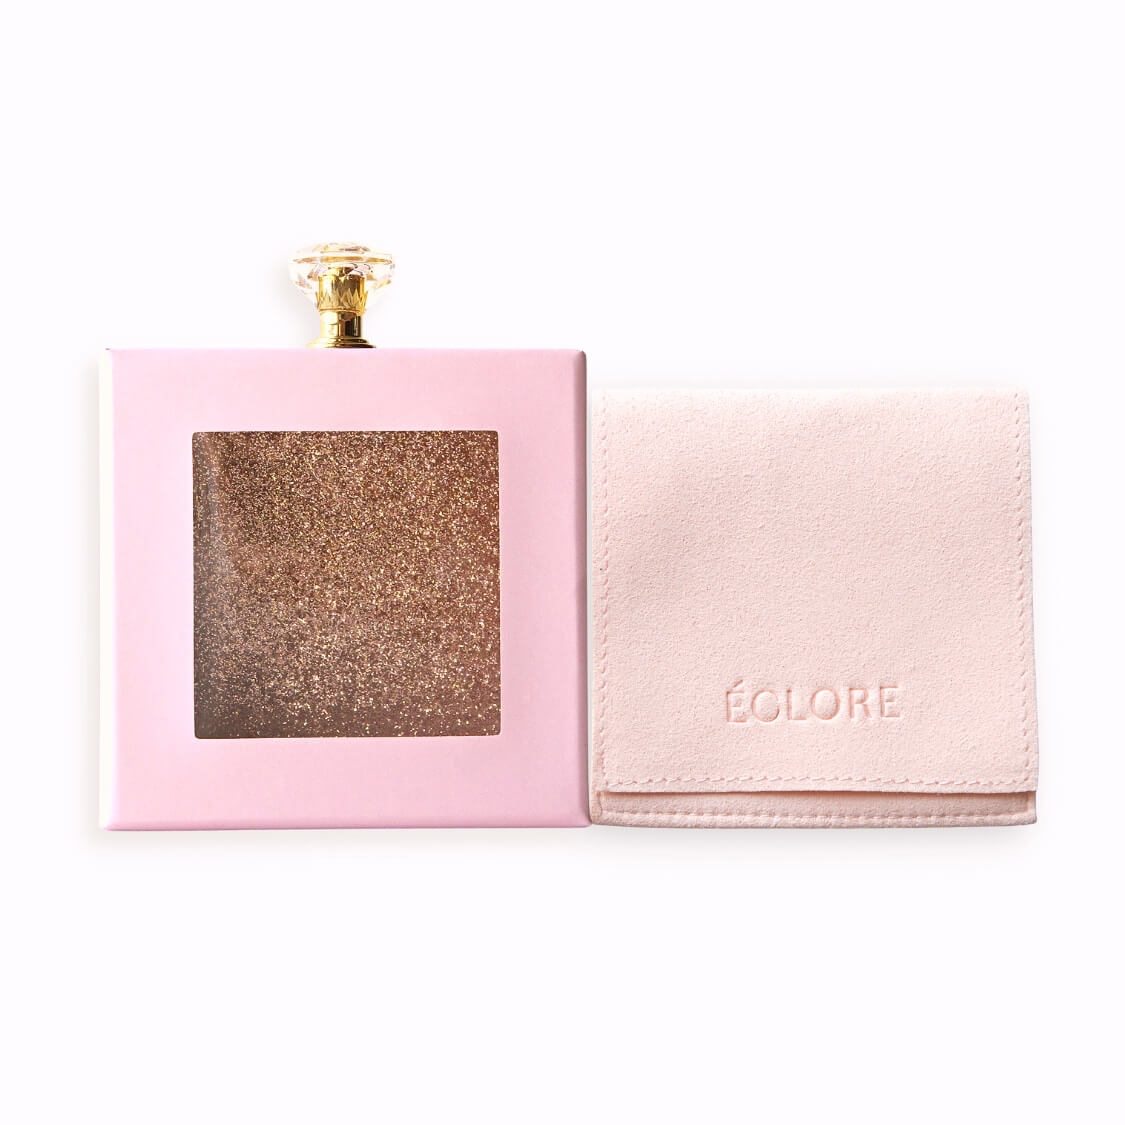 eclore jewelry package pouch